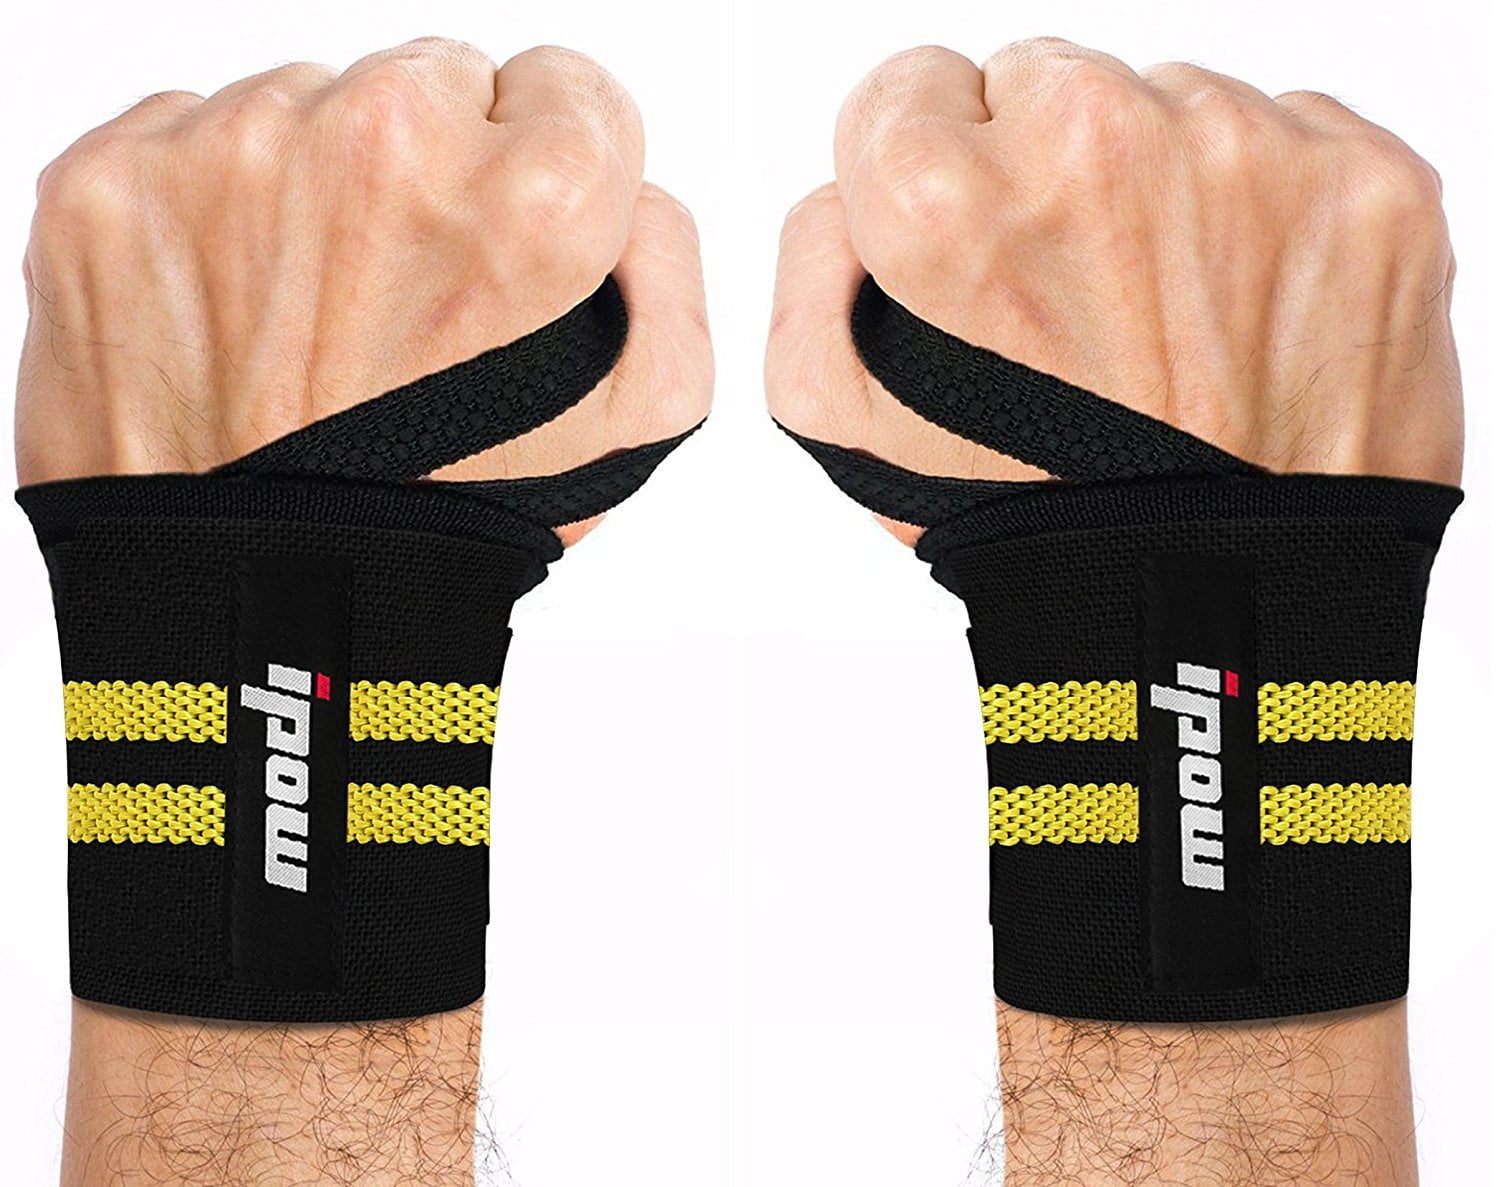  Boldfit Weight Lifting Straps Wrist Supporter For Gym